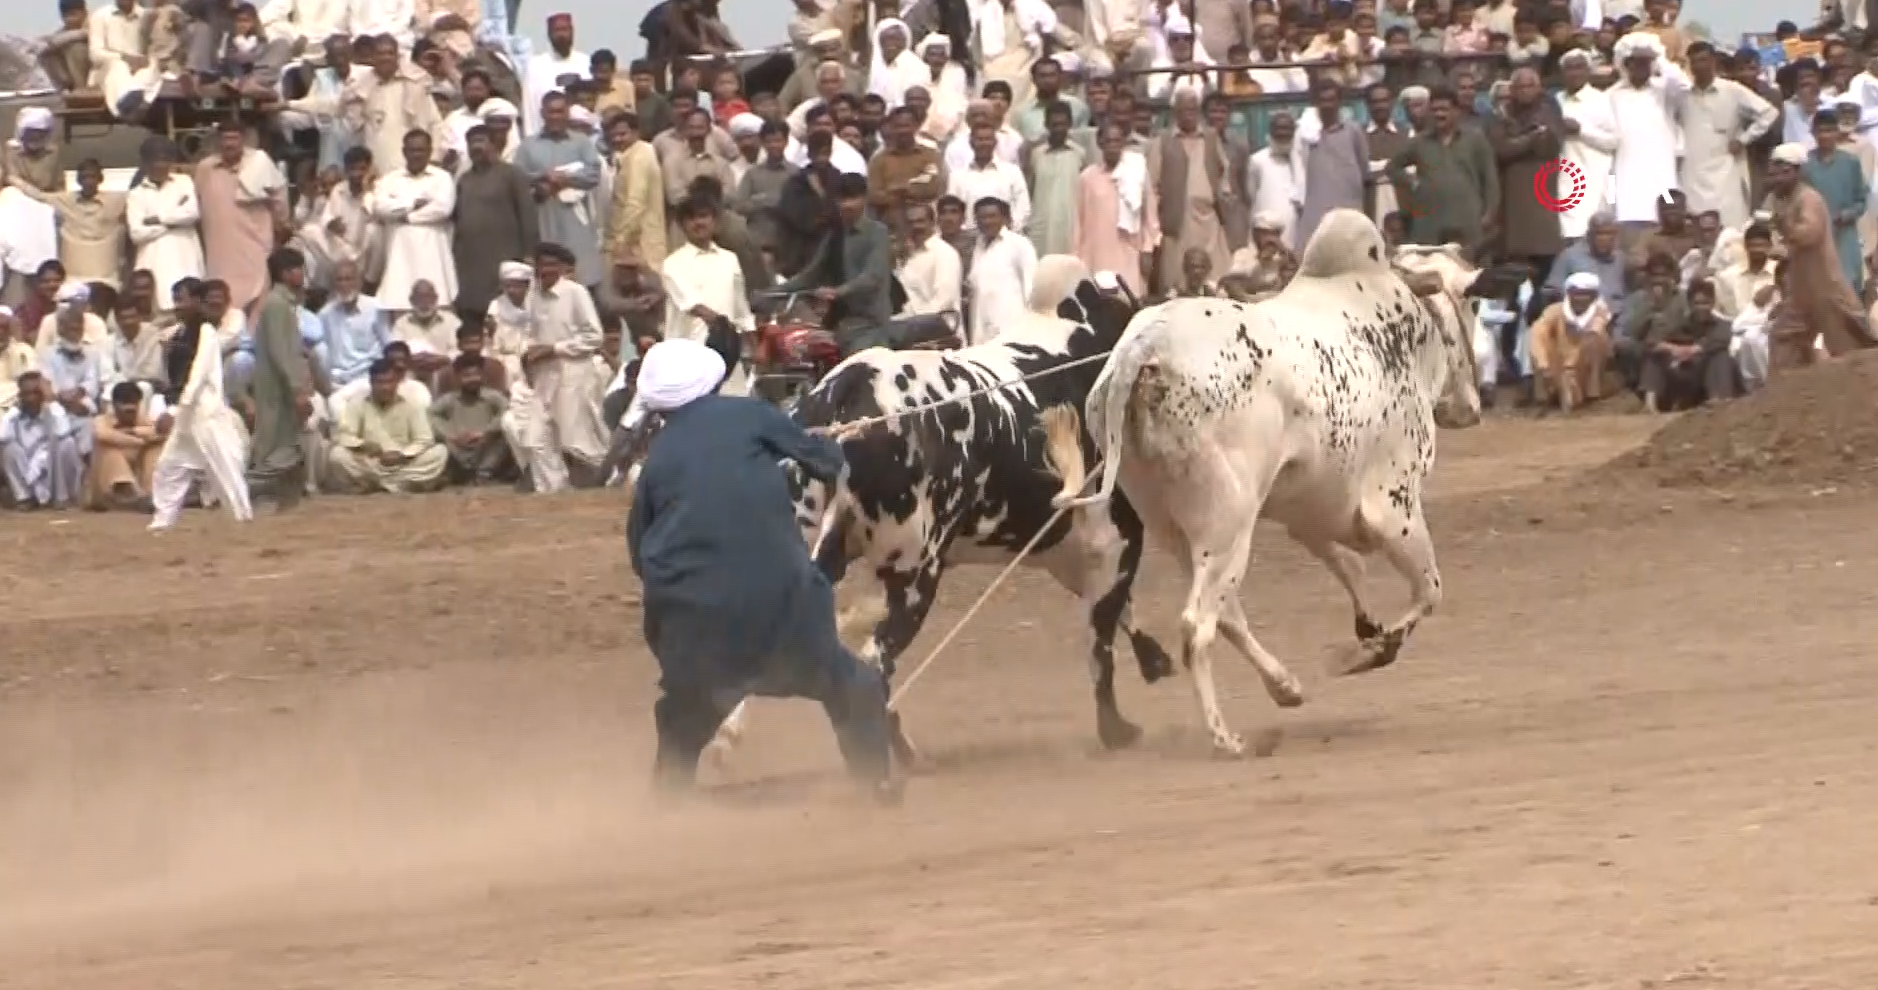 The Colorful Tradition Of Ox And Bull Racing In Pakistan